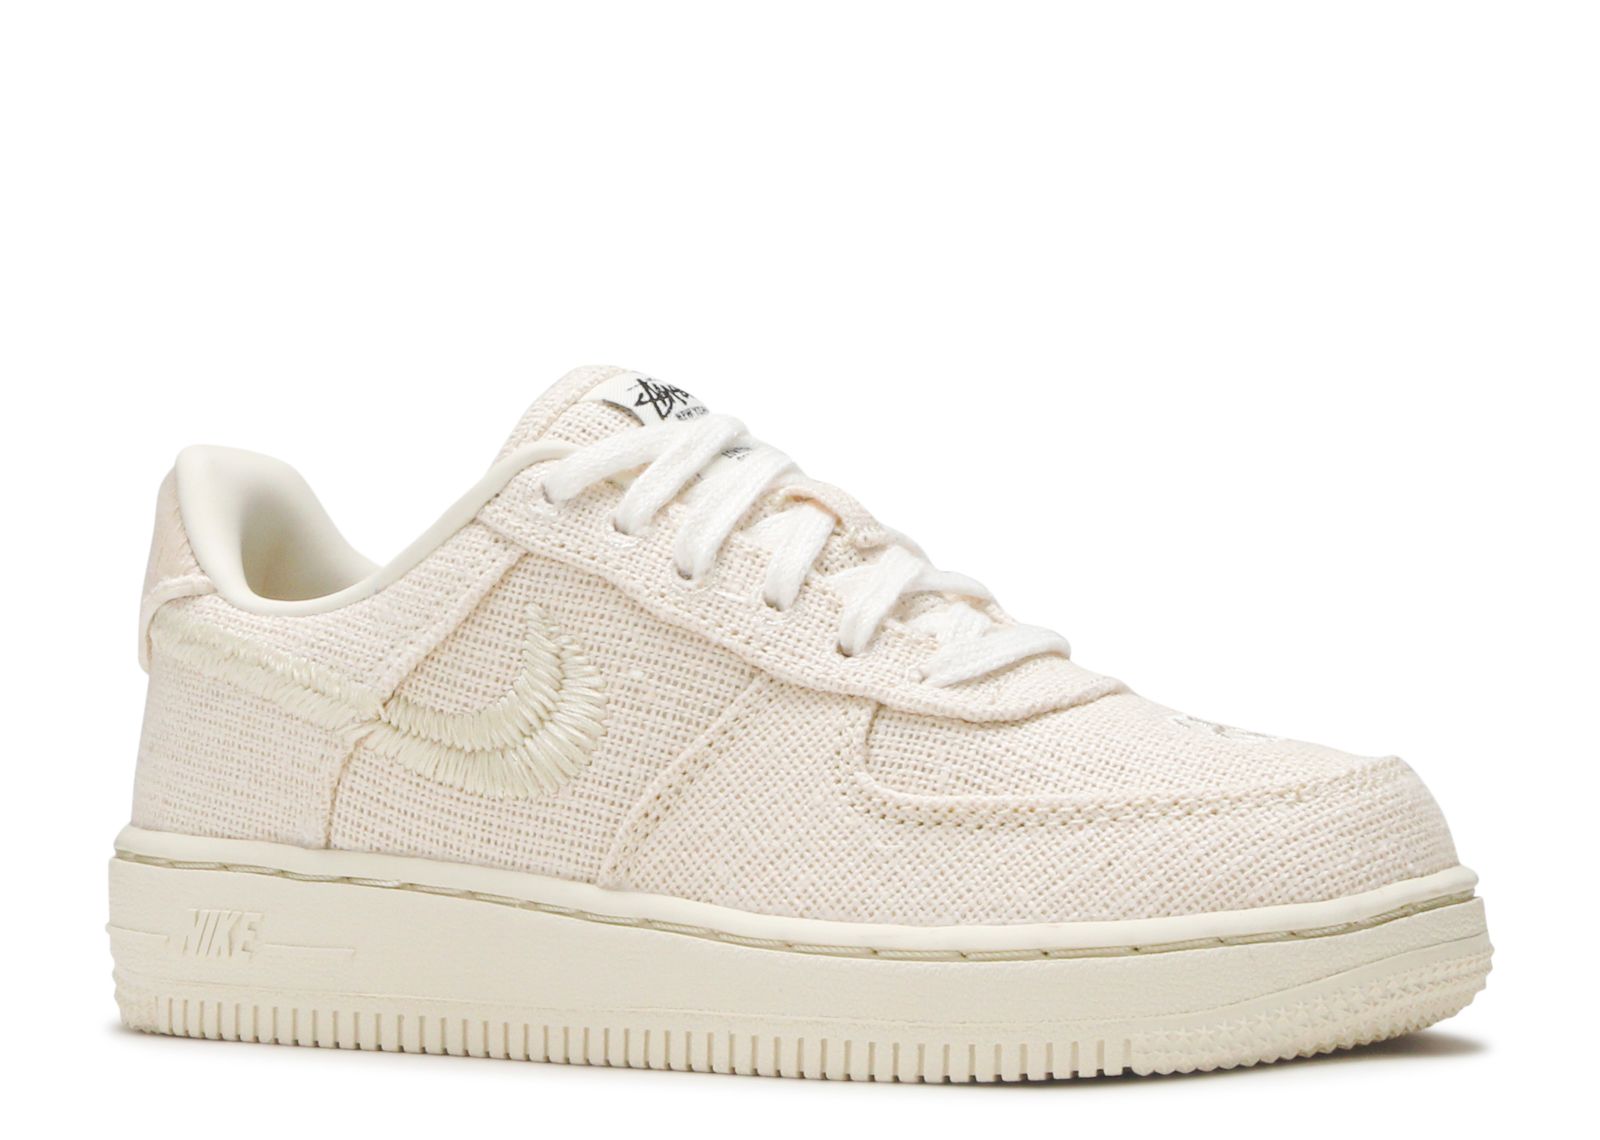 Stussy X Air Force 1 Low PS 'Fossil' - Nike - DD1578 200 - fossil 